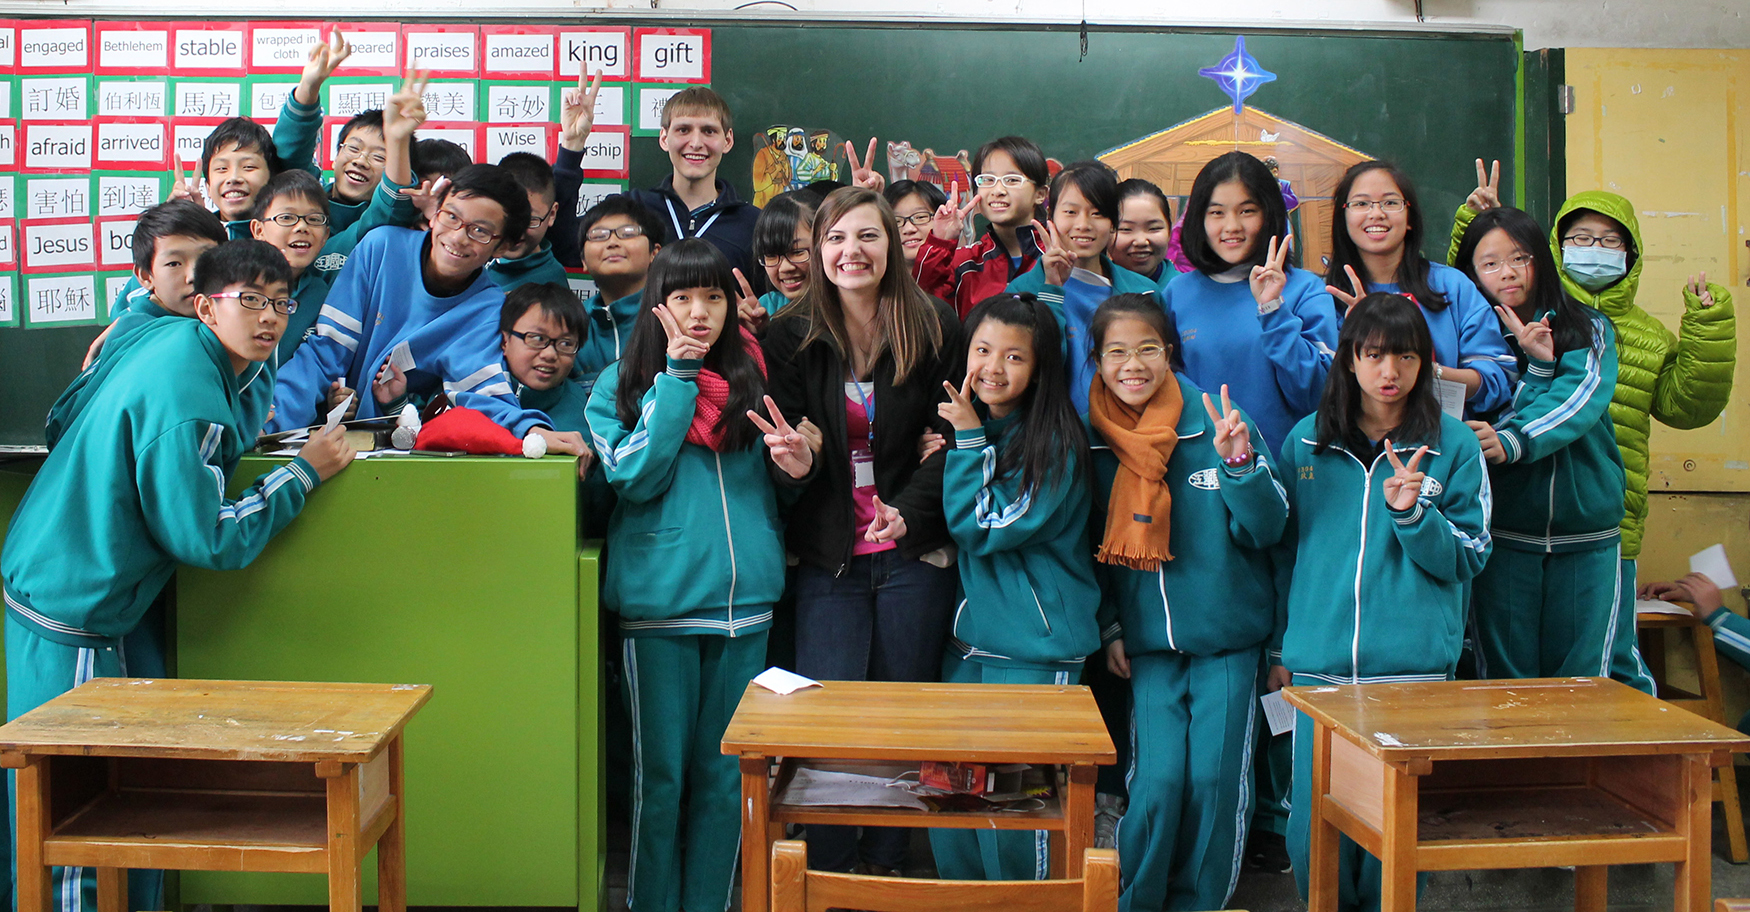  Taiwanese school children gather around CU students Jeremy Cheatham and Bethany Thomaston during their mission trip to Taipei, teaching them about the Nativity Story. (CU Photo provided by Bethany Thomaston)